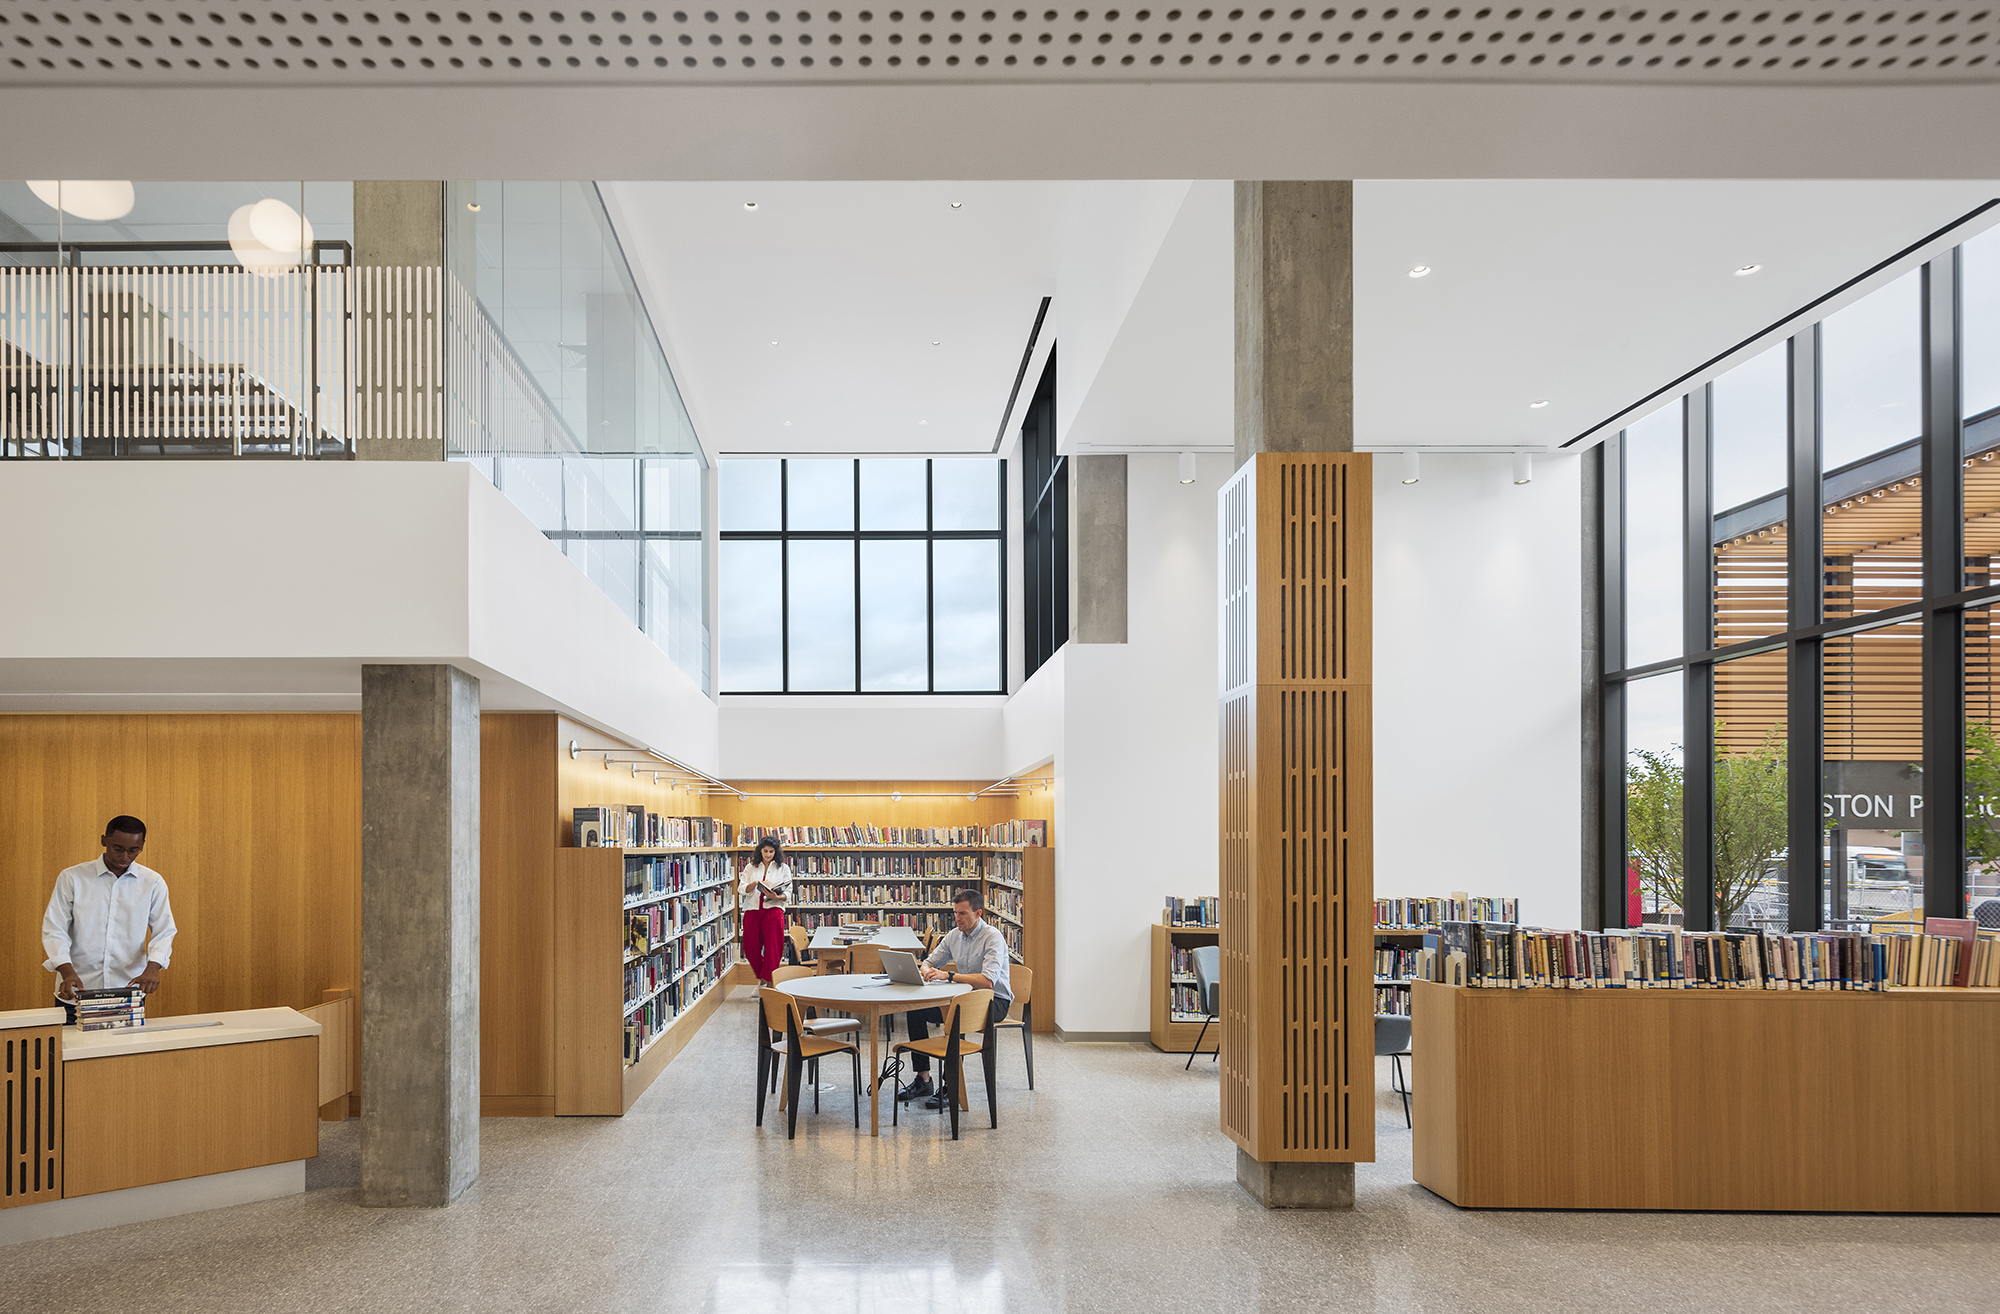 The Roxbury Branch of the Boston Public Library reopens its doors!